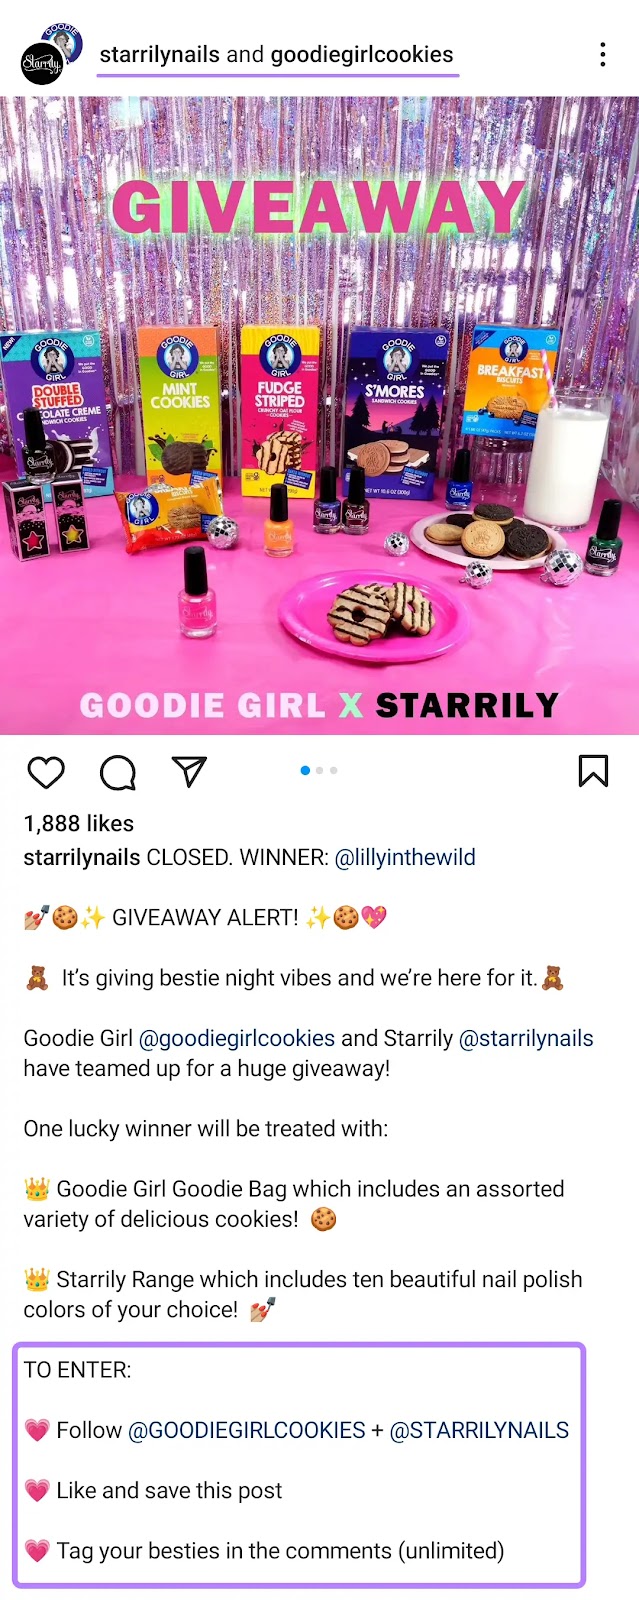 An illustration  of Instagram giveaway by Goodie Girl and Starrily, successful  which participants person  to travel  some  accounts successful  bid   to participate